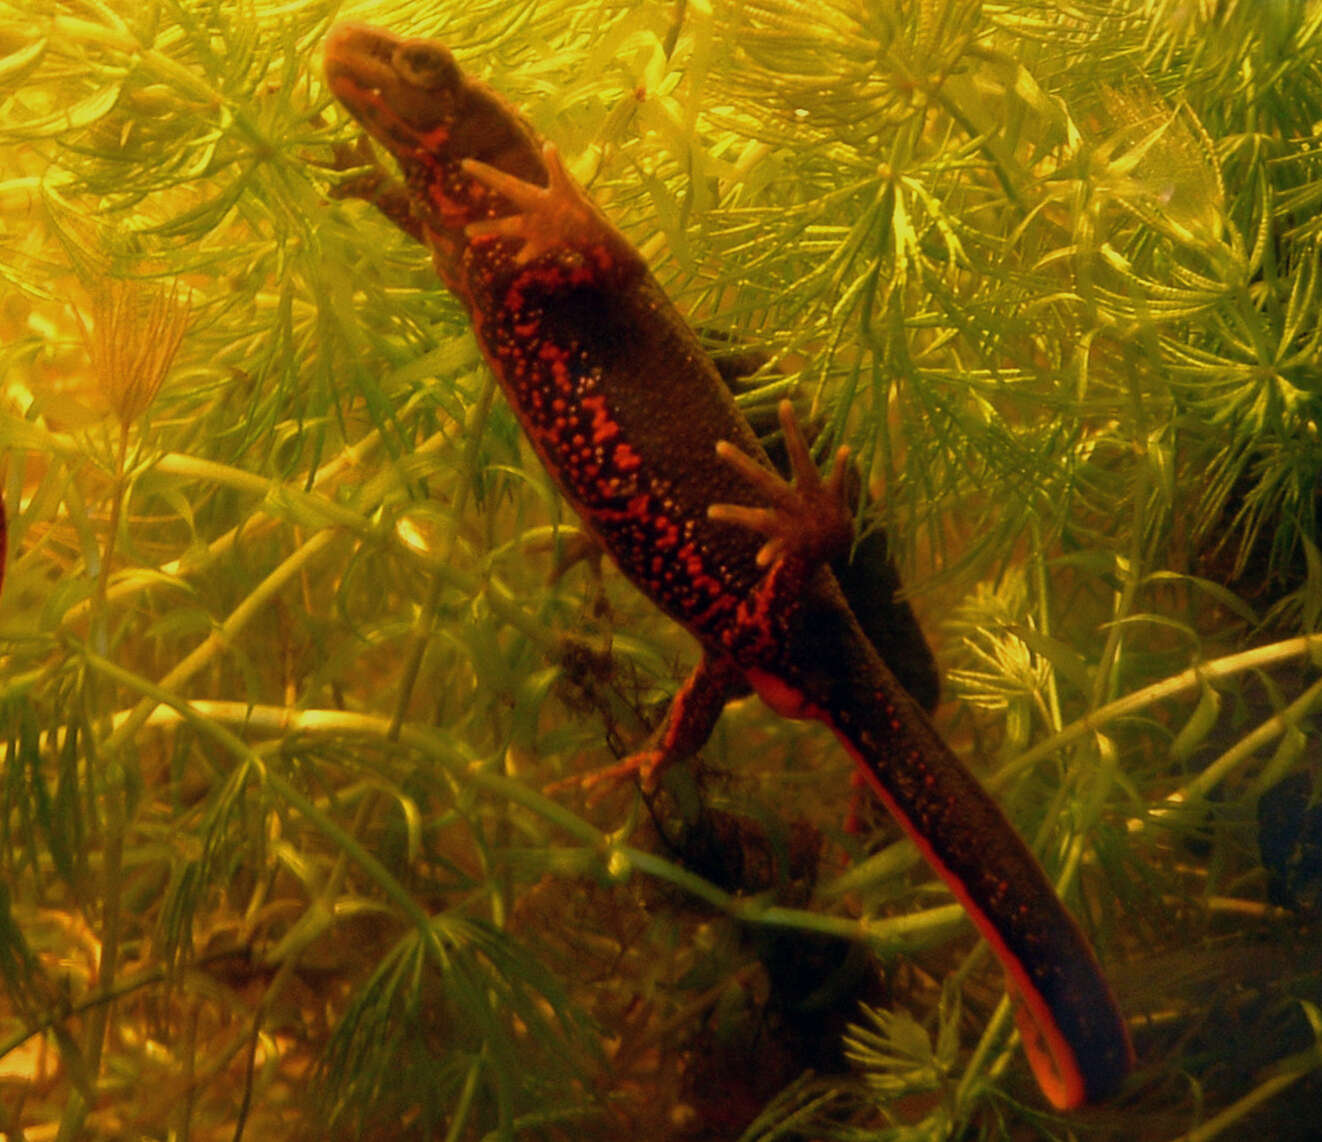 Image of Japanese Fire-bellied Newt